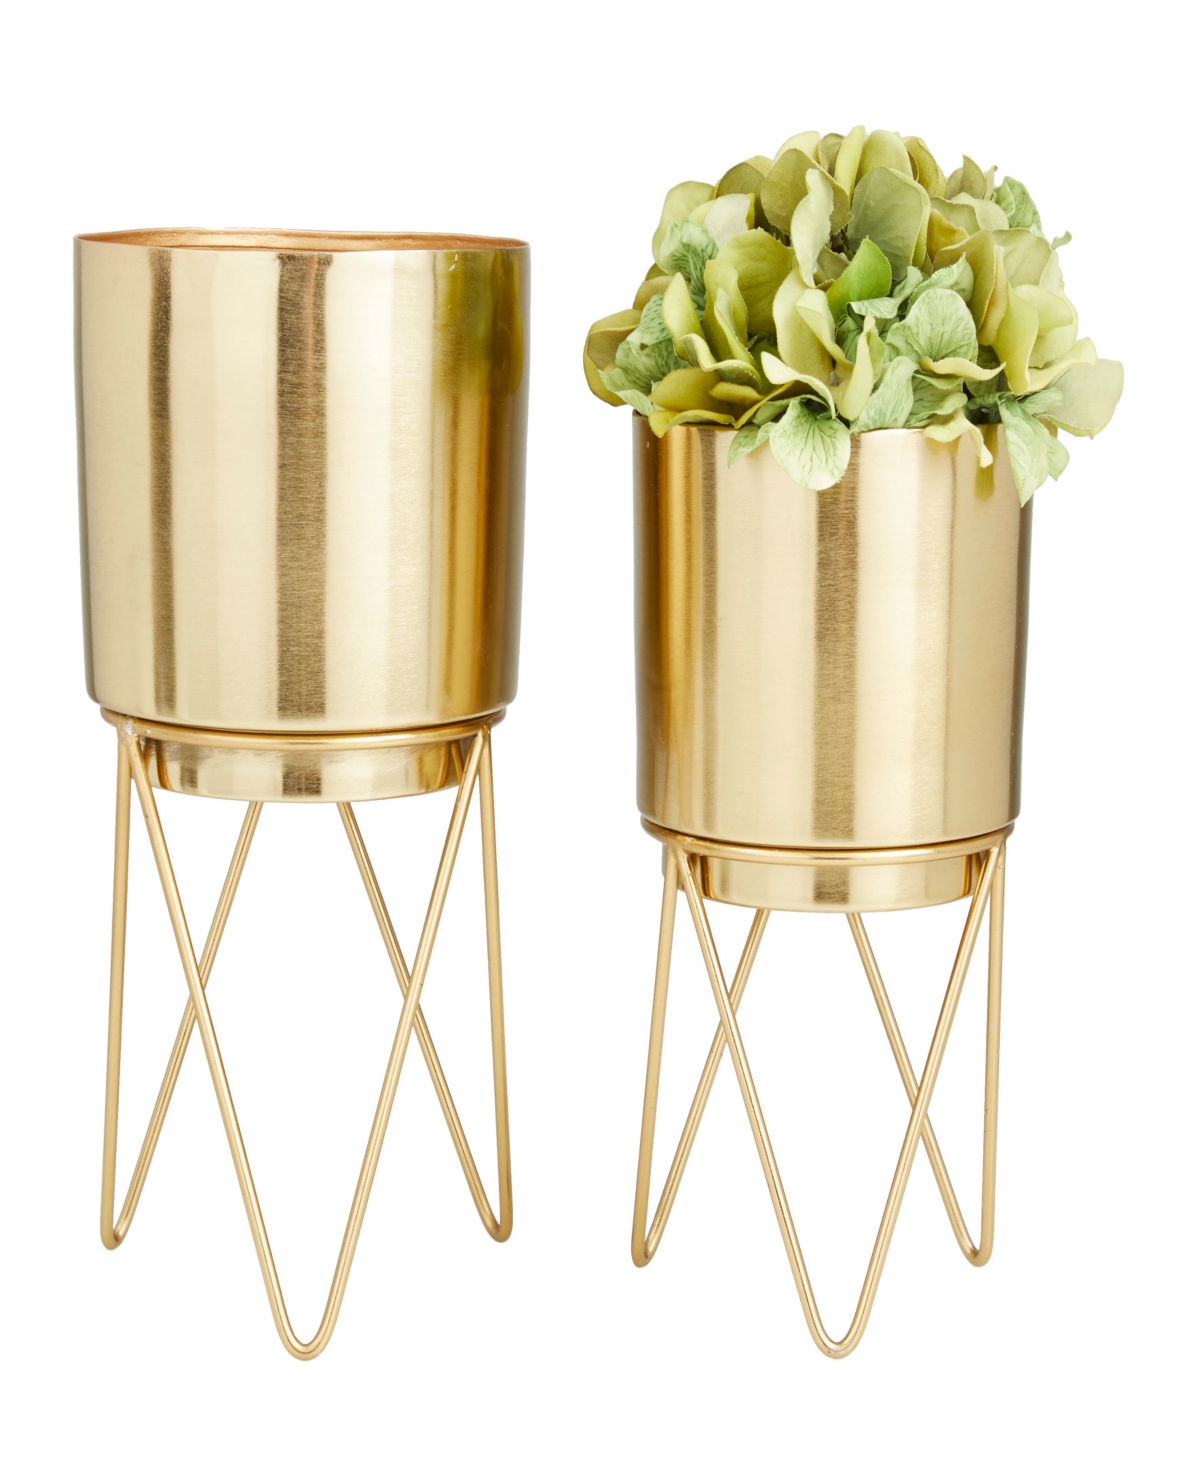 Gold-Tone Metal Planter with Removable Stand Set of 2 - Black